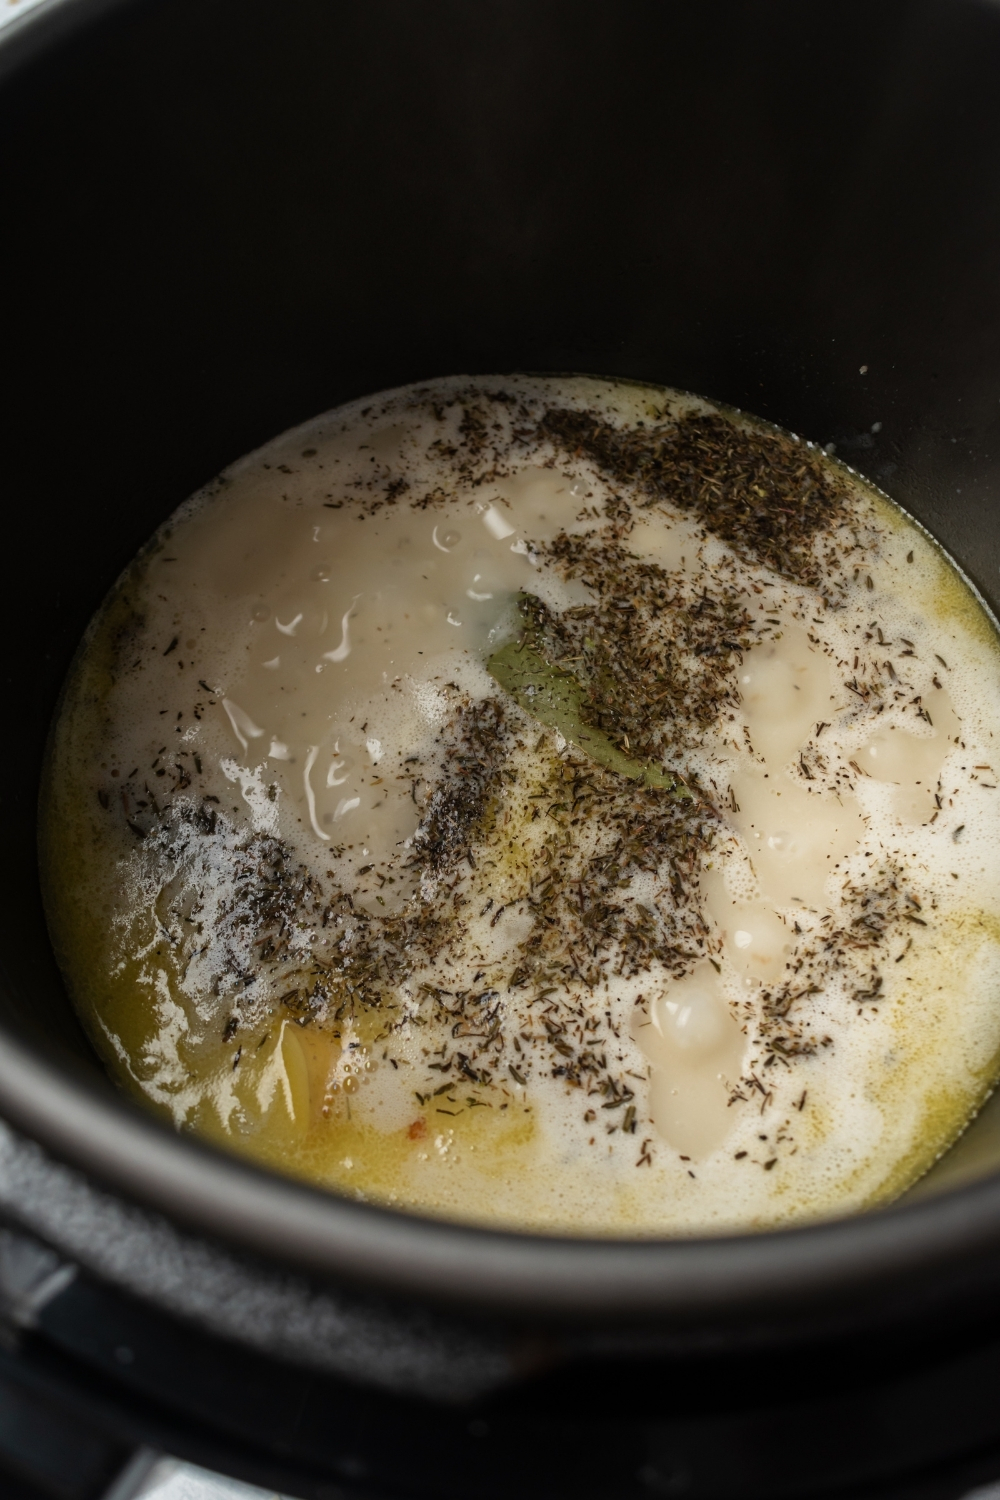 An instant pot filled with clam chowder ingredients.